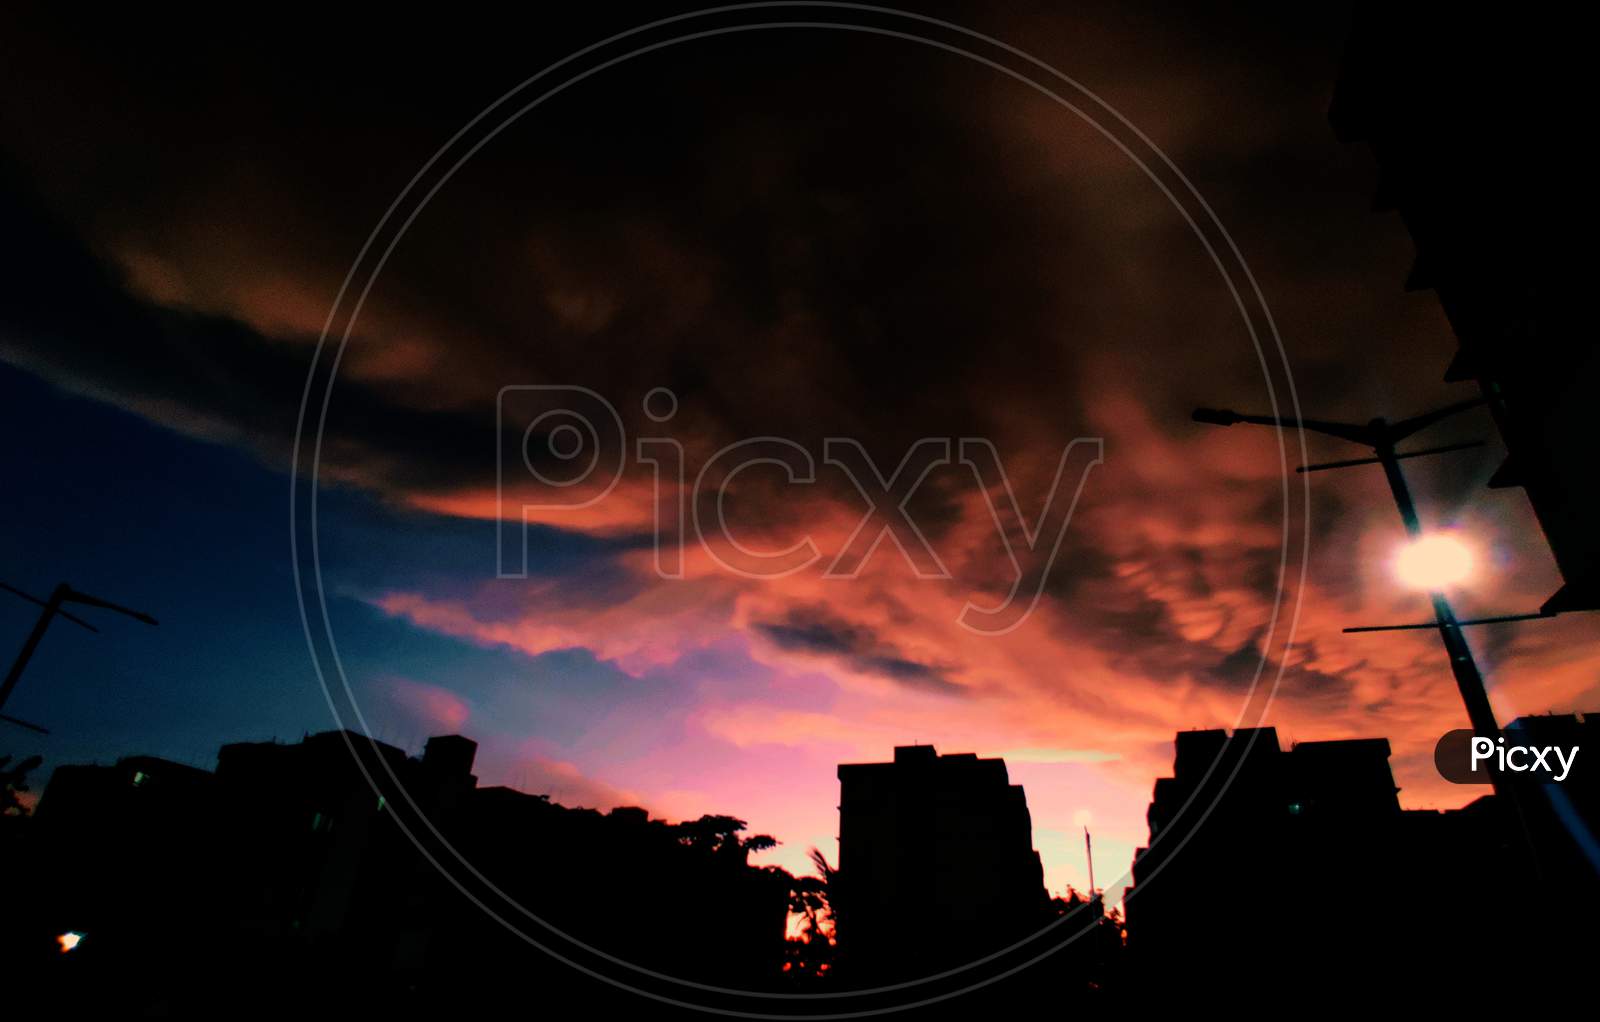 Silhouette  Of Buildings Over Sunset Sky